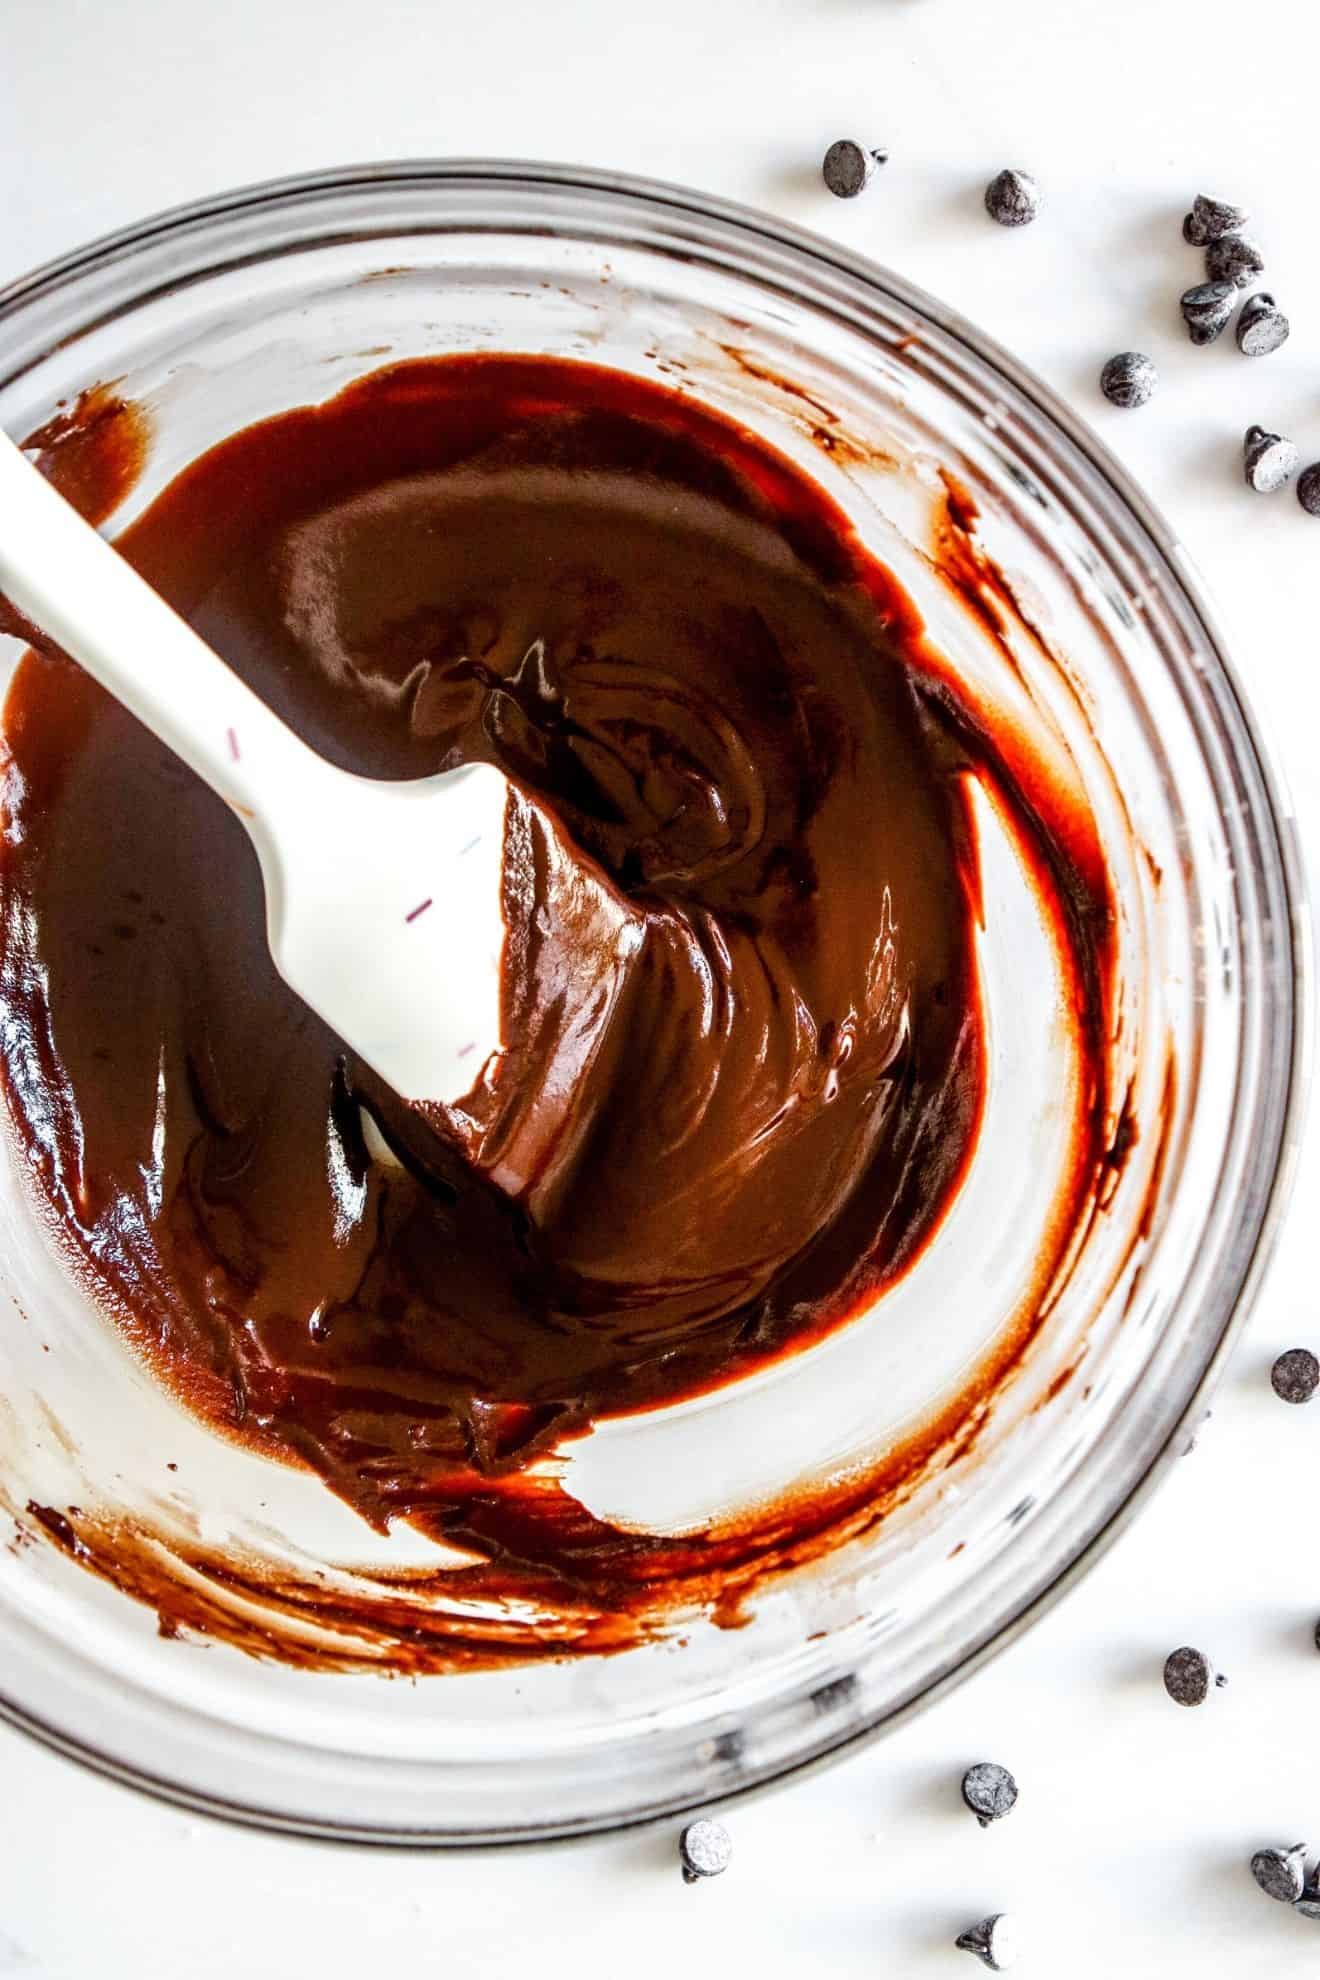 This is an overhead image of a glass bowl with melted chocolate. A spatula is in the bowl with the melted chocolate. The glass bowl sits on a white counter with more chocolate chips scattered around it.